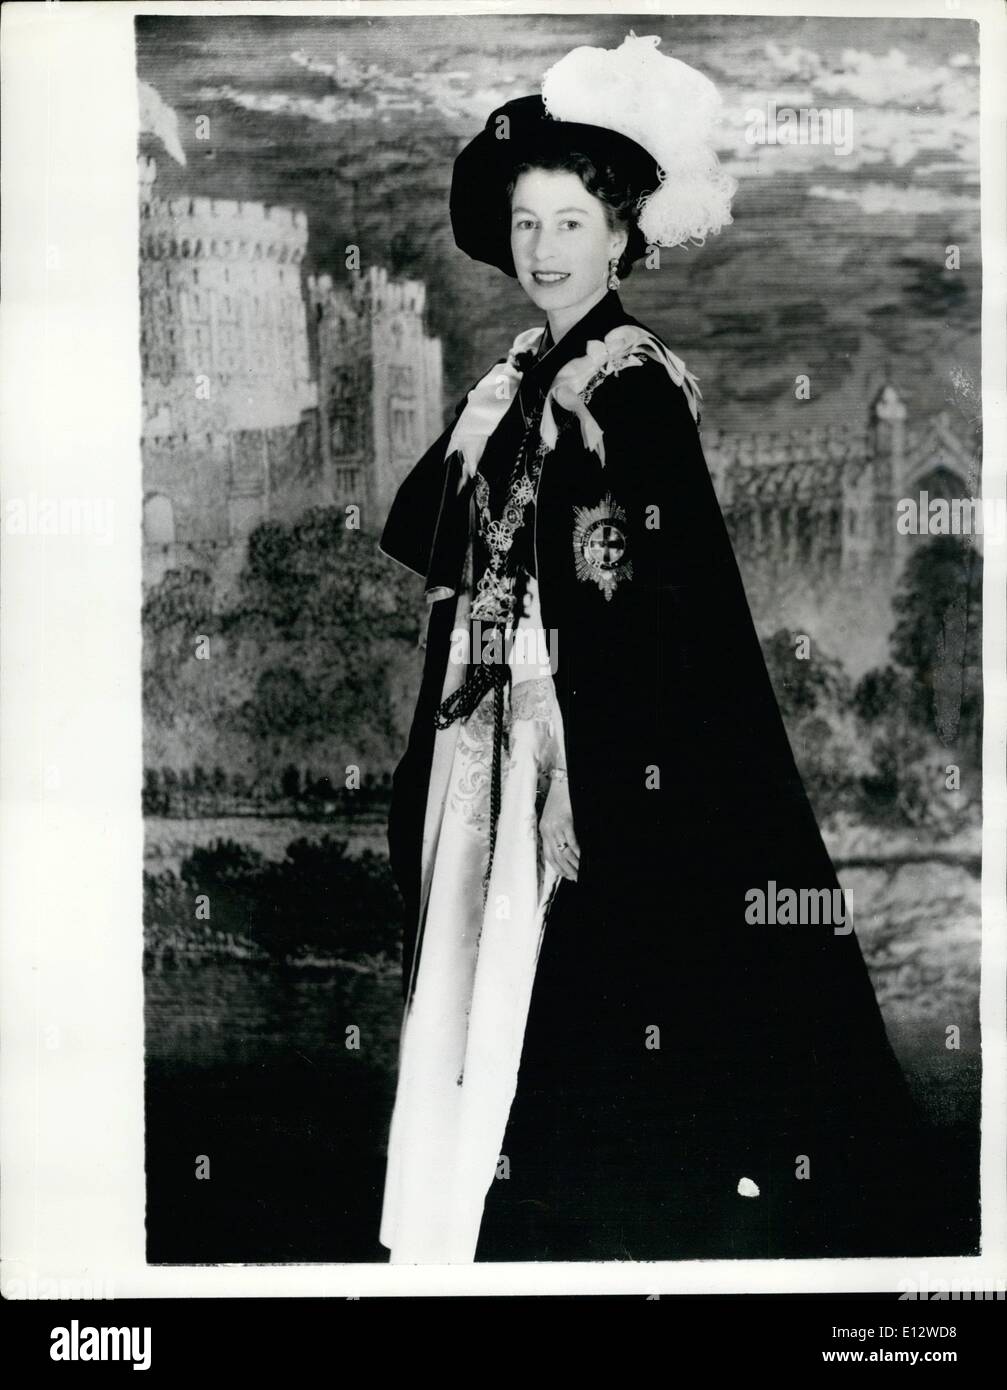 Feb. 26, 2012 - Garter Sovereign. This photo of Queen Elizabeth was made by Cecil Beaton at Buckingham Palace especially in connection with the Garter Ceremony to be held at St. George's Chapel, Windsor Castle. At the ceremony Sir Anthony Eden, Earl Attlee and the Earl of Iveagh are to be invested. This will bring the membership of the Order up to 25 and no one else can be accepted into the Order until the death of one of the present holders. The Queen, Sovereign of the Order, most exalted of Britain's Orders of Chivalry, is shown in the habit and signs of the Order Stock Photo